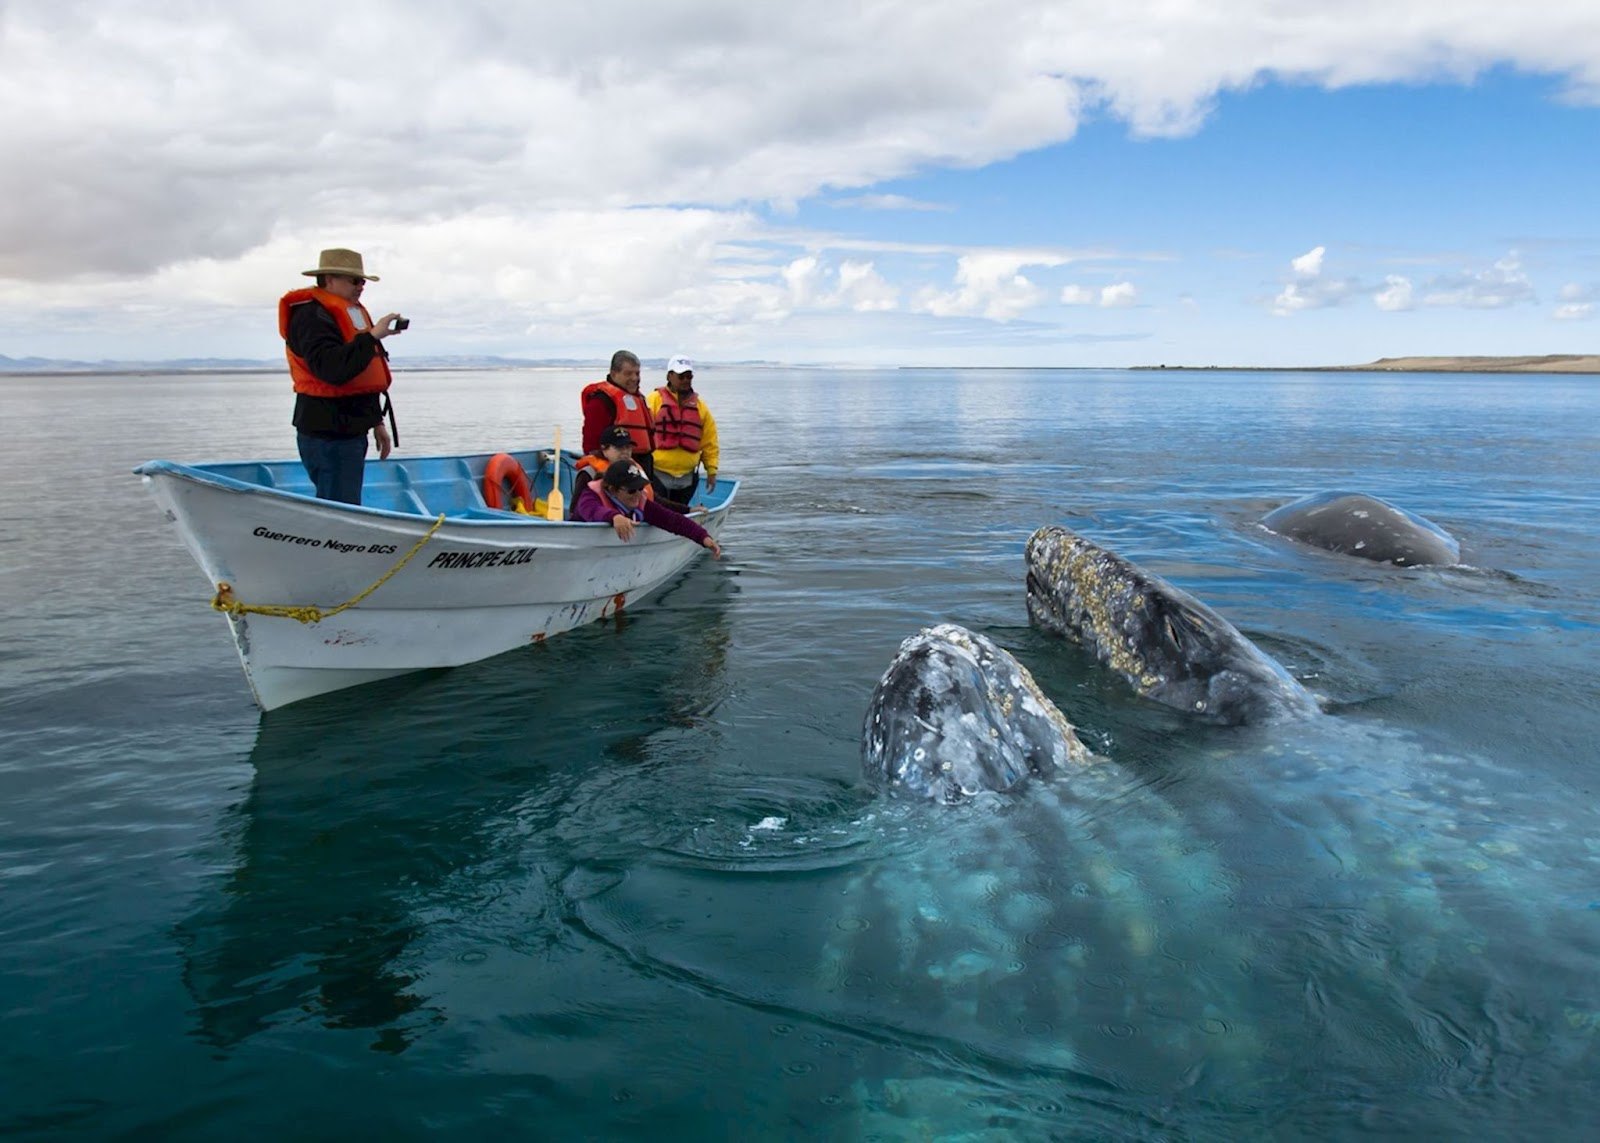 The Best Places In The World For Whale Watching